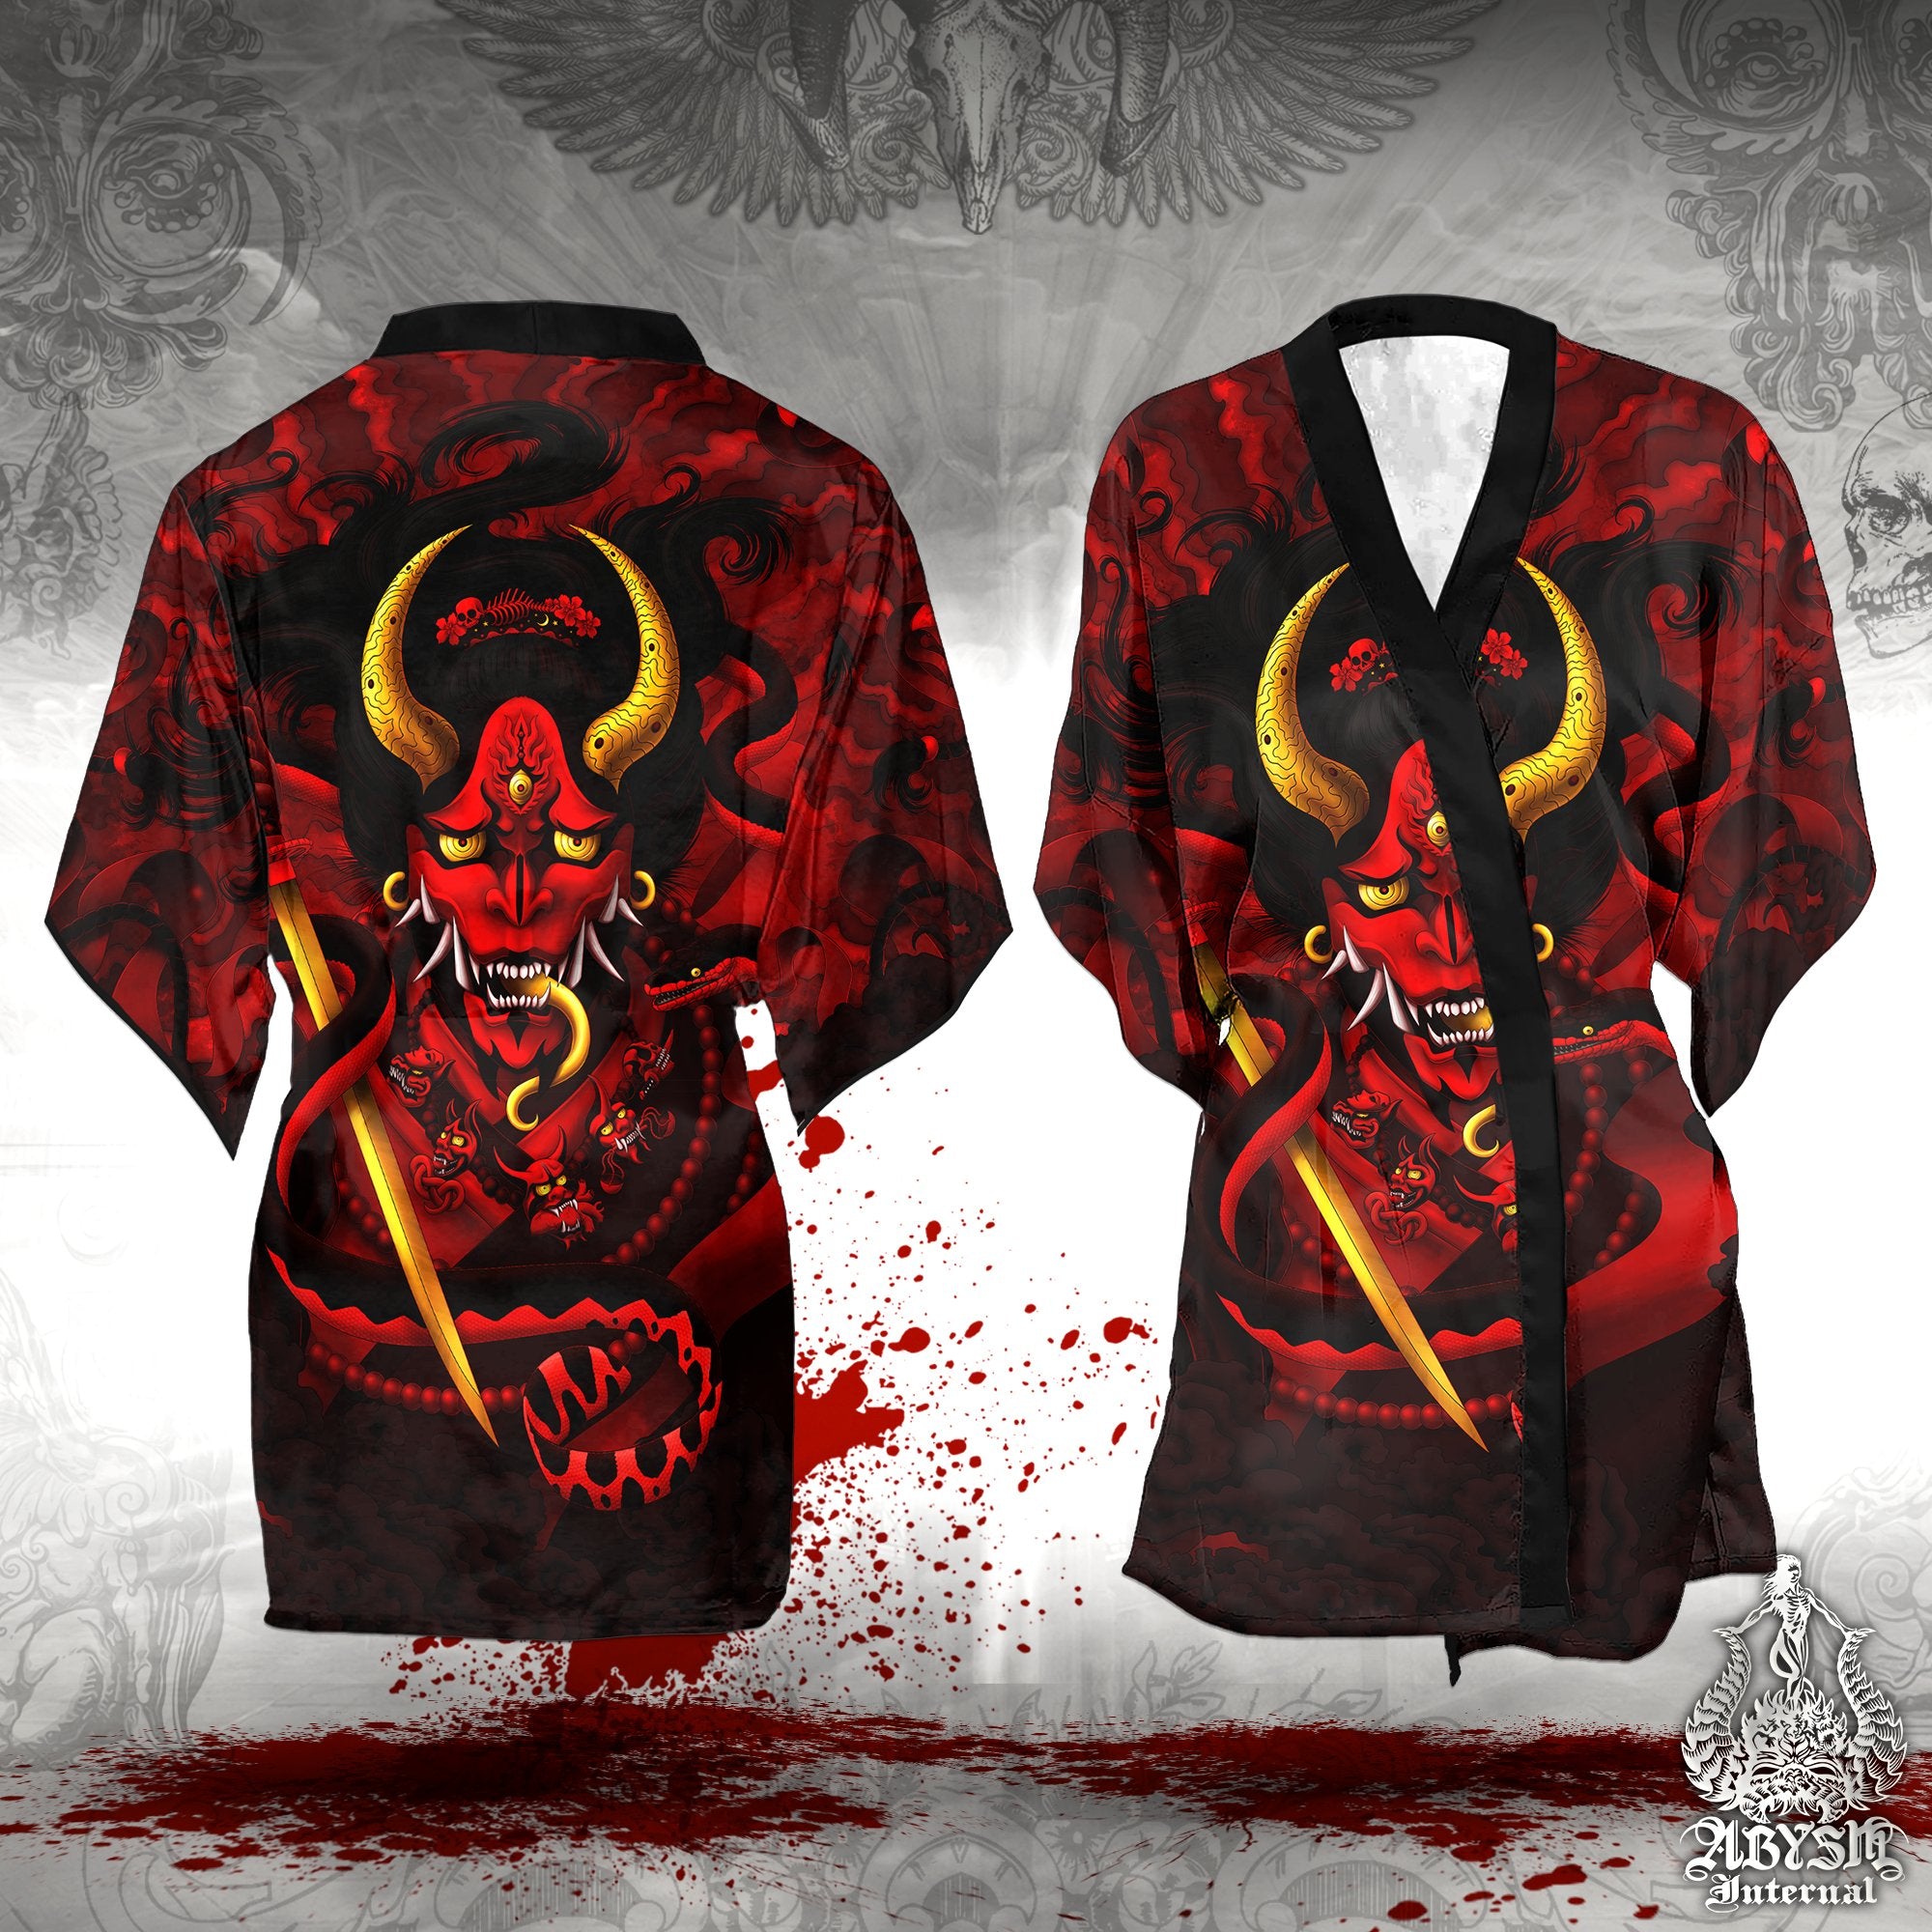 Japanese Demon Short Kimono Robe, Beach Party Outfit, Red Hannya Coverup, Oni Art, Summer Festival, Alternative Clothing, Unisex - Snake, Bloody Red Goth - Abysm Internal